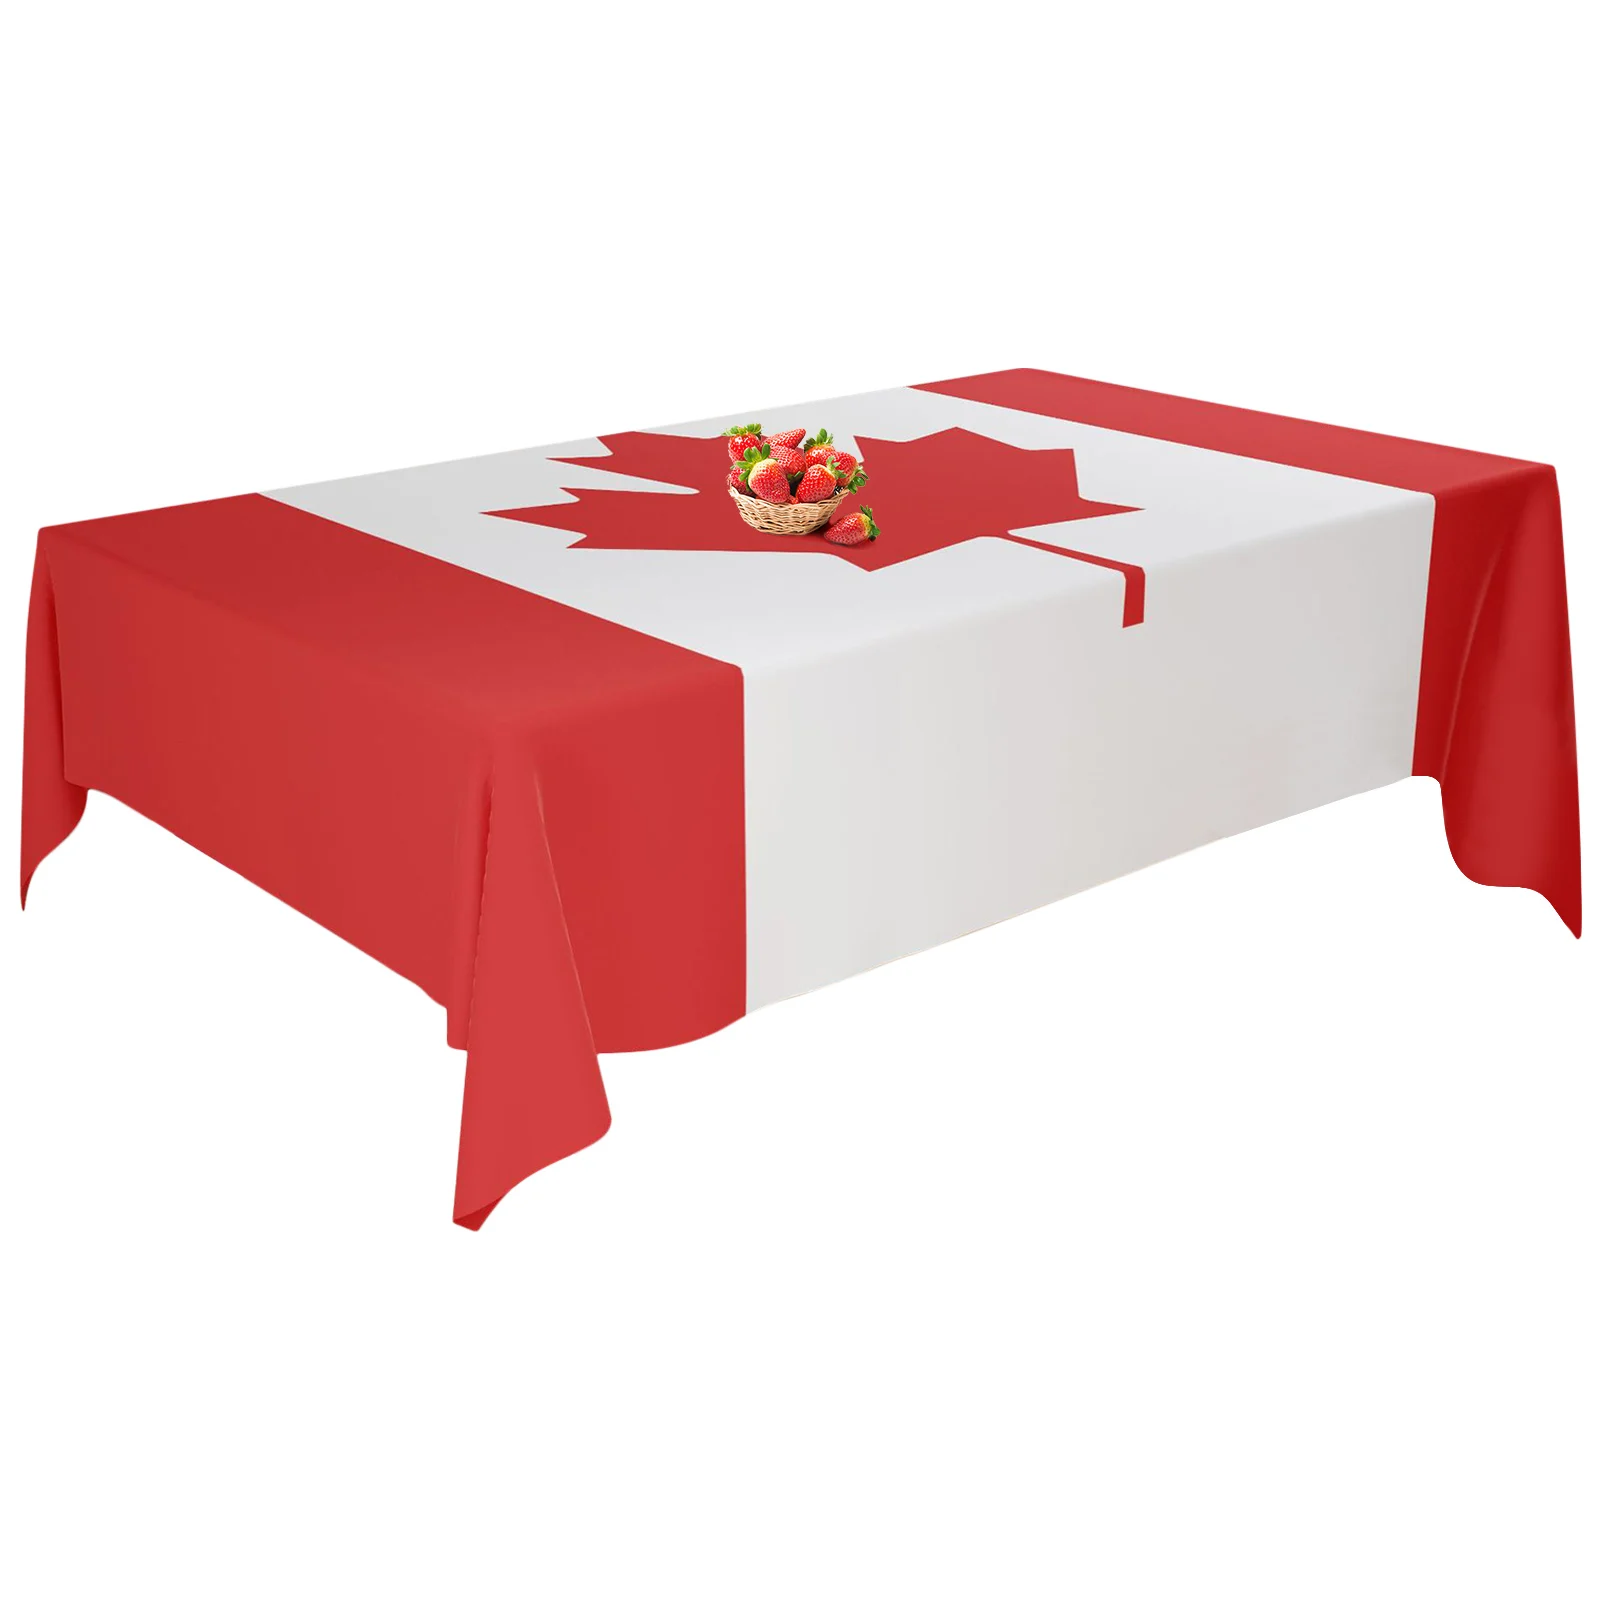 

Canadian Flag Table Cover Canada Flag Maple Leaf Table Cloth Patriotic Table Decorations For National Day Dinner Party More